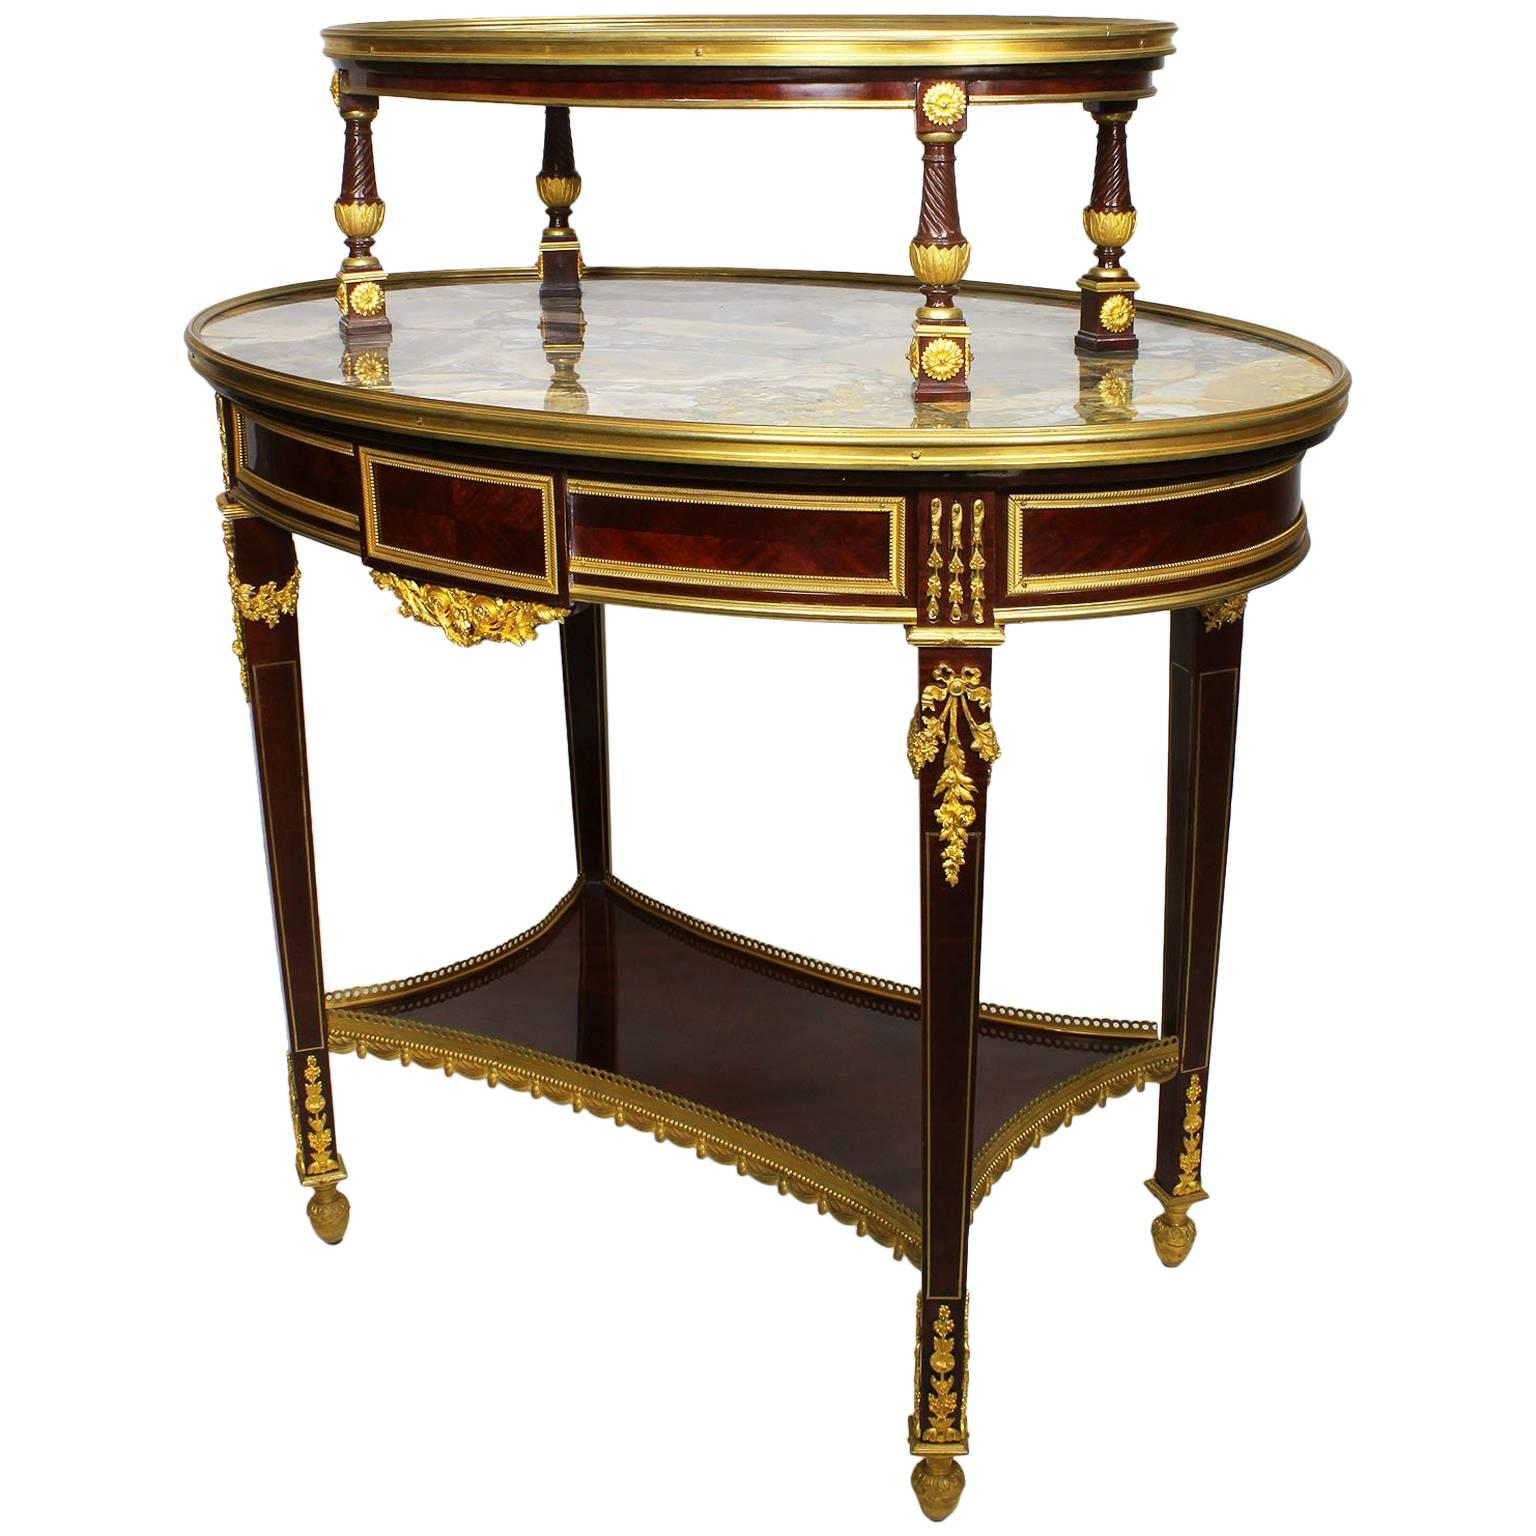 French 19th Century Louis XVI Style Ormolu-Mounted Mahogany Two-Tier Tea-Table For Sale